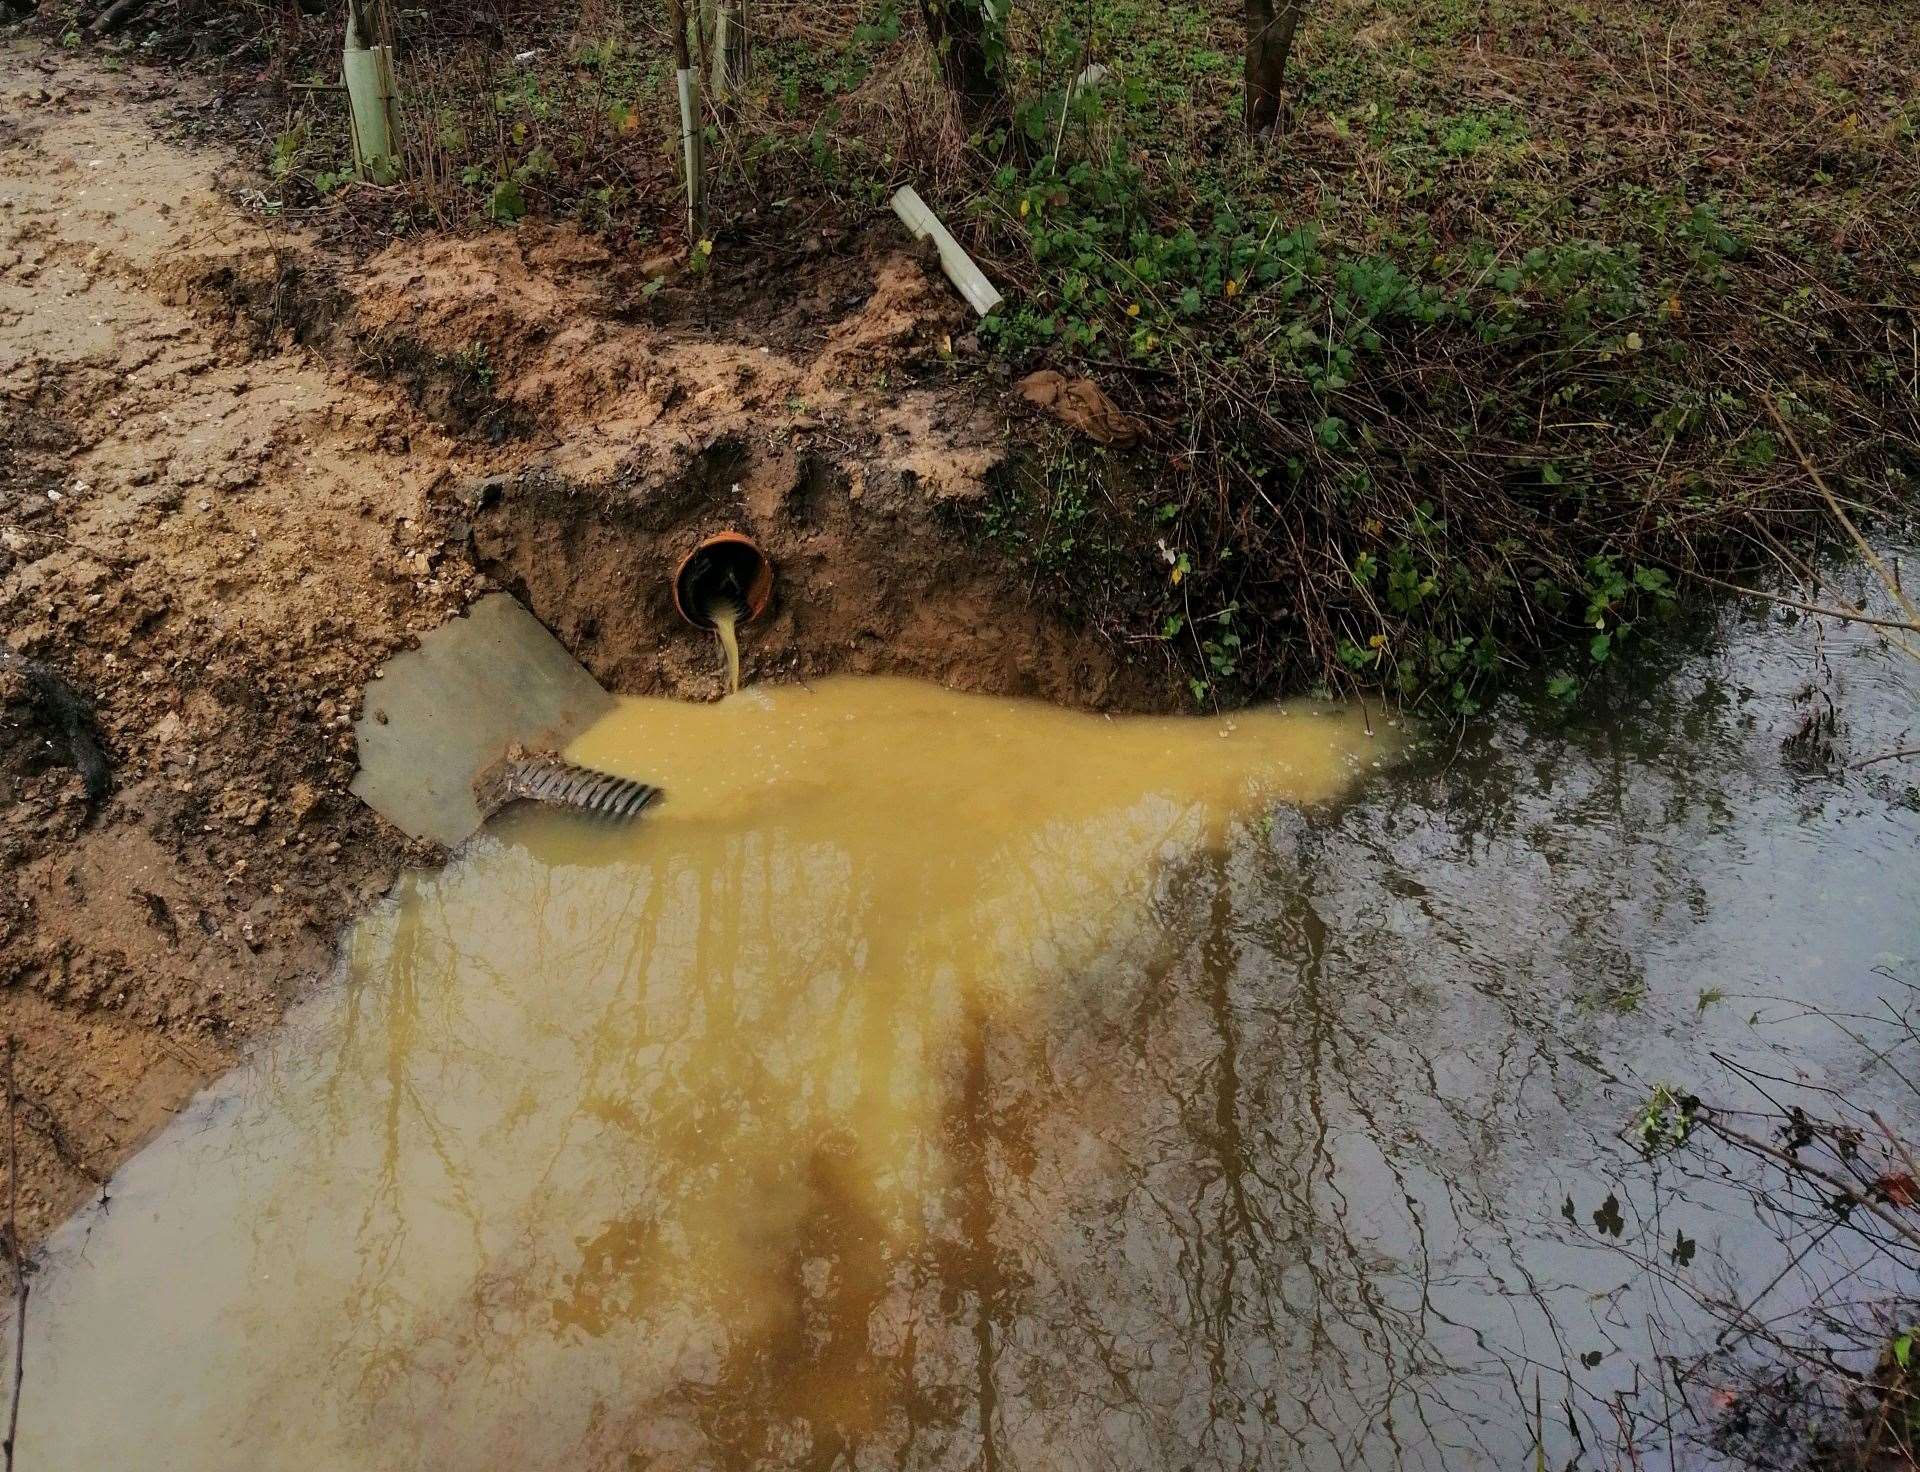 Pollution flows from an outflow into a tributary of the River Len at Gidds Pond in Bearsted